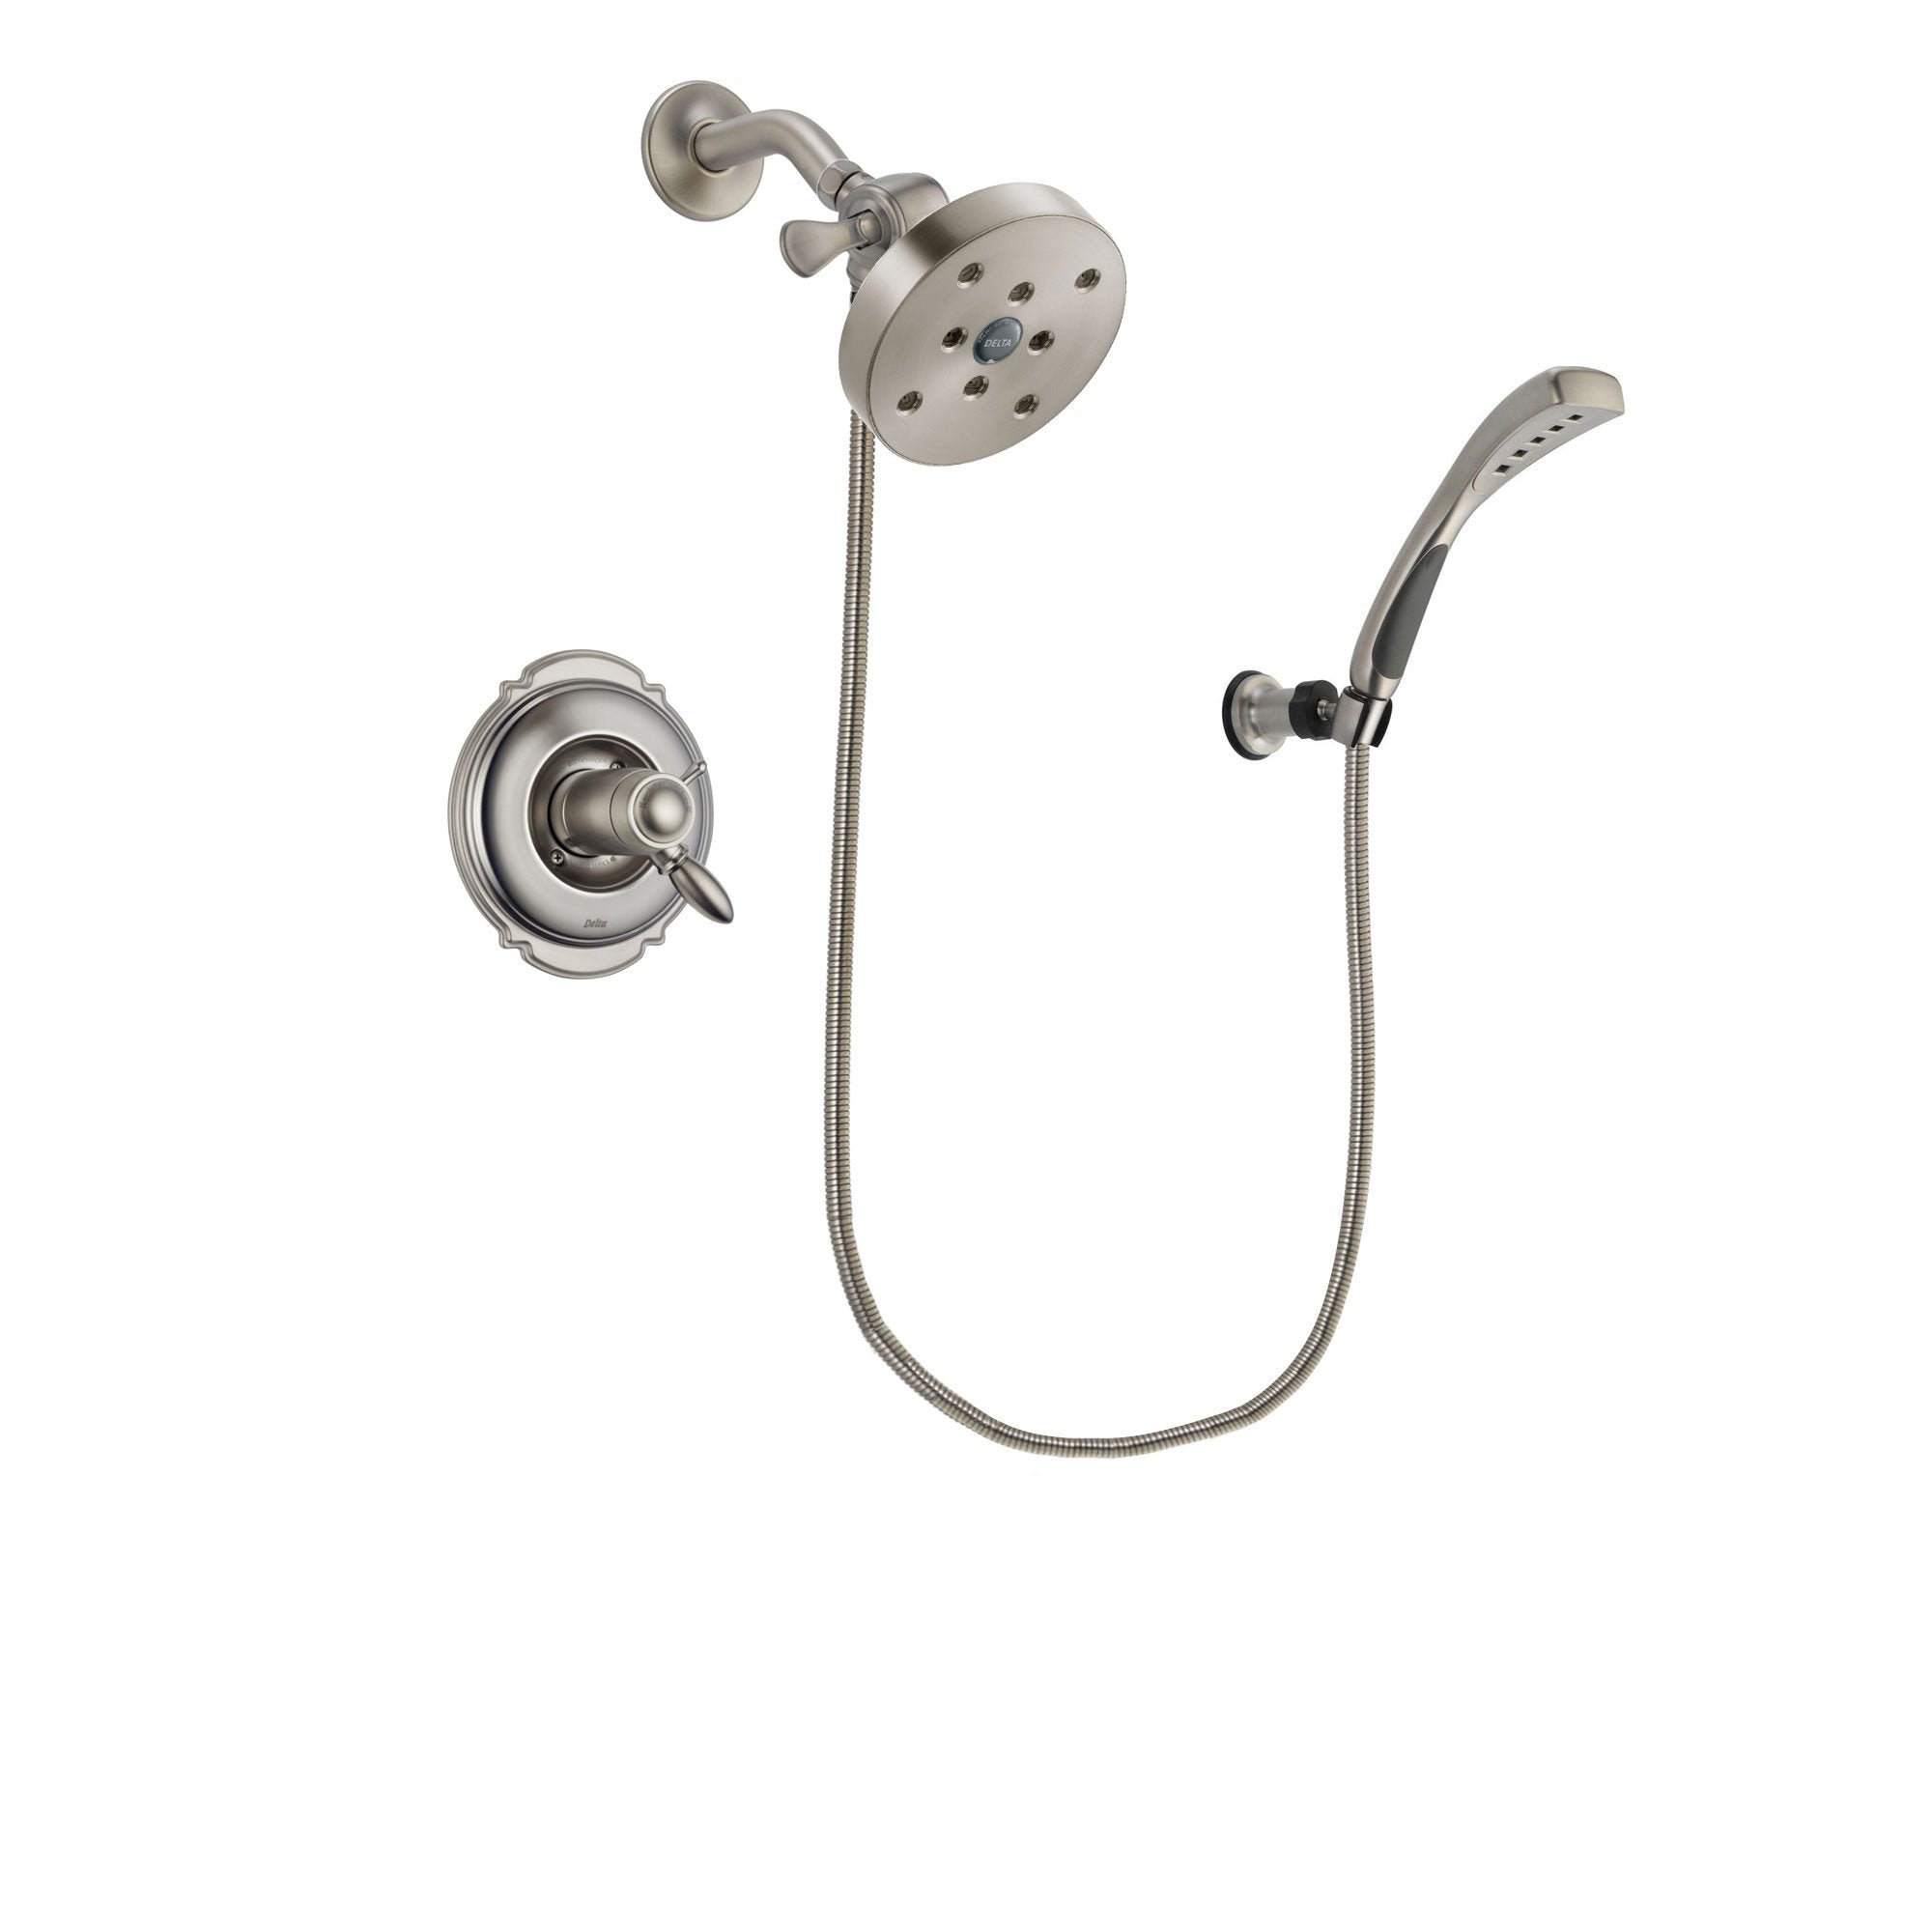 Delta Victorian Stainless Steel Finish Thermostatic Shower Faucet System Package with 5-1/2 inch Shower Head and Wall Mounted Handshower Includes Rough-in Valve DSP1890V